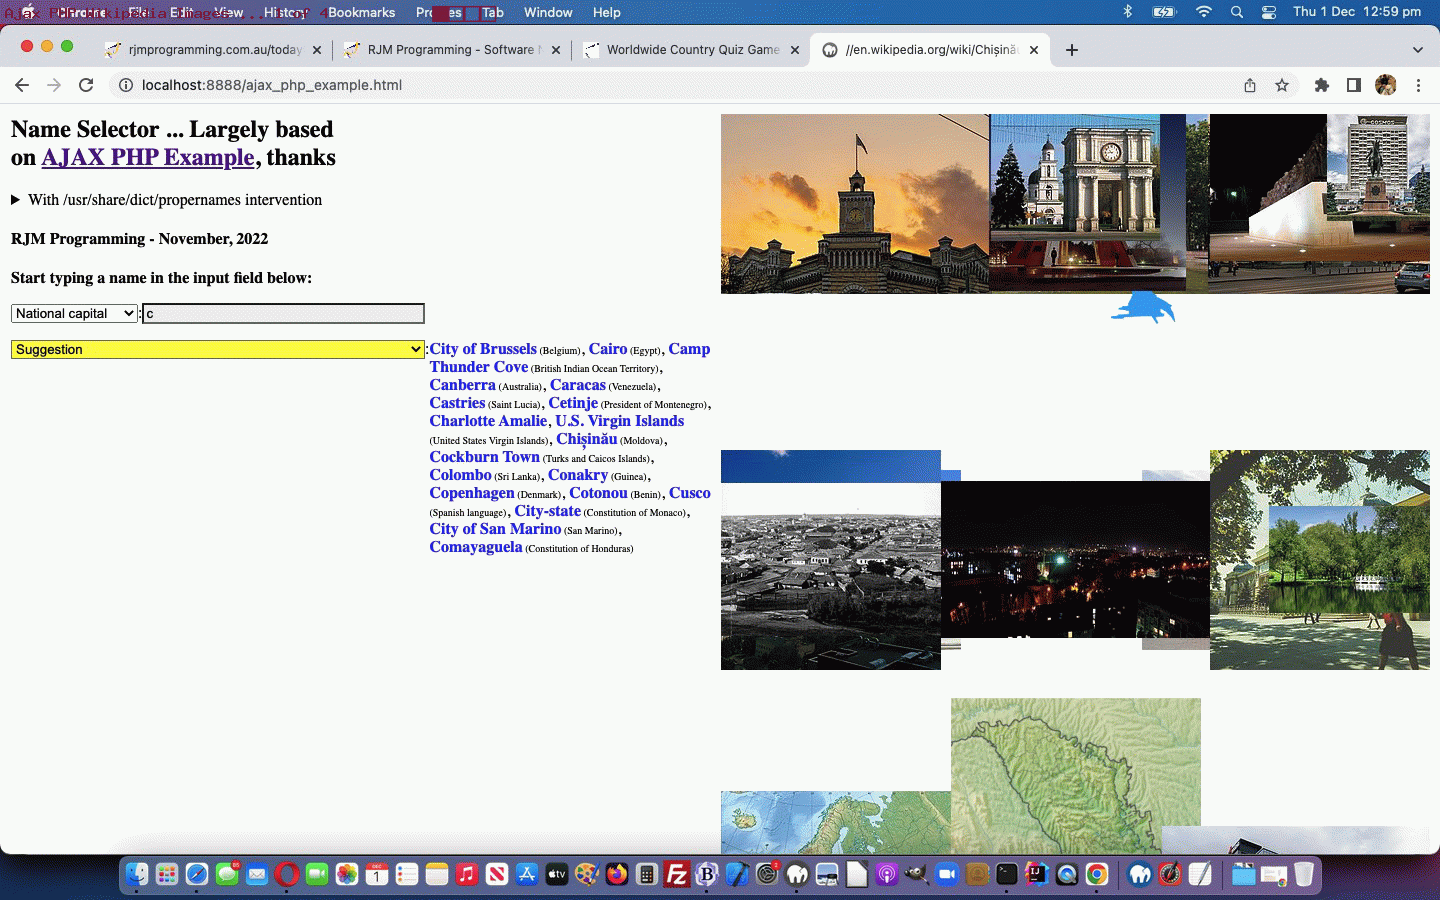 Ajax PHP Game Wikipedia Images Tutorial